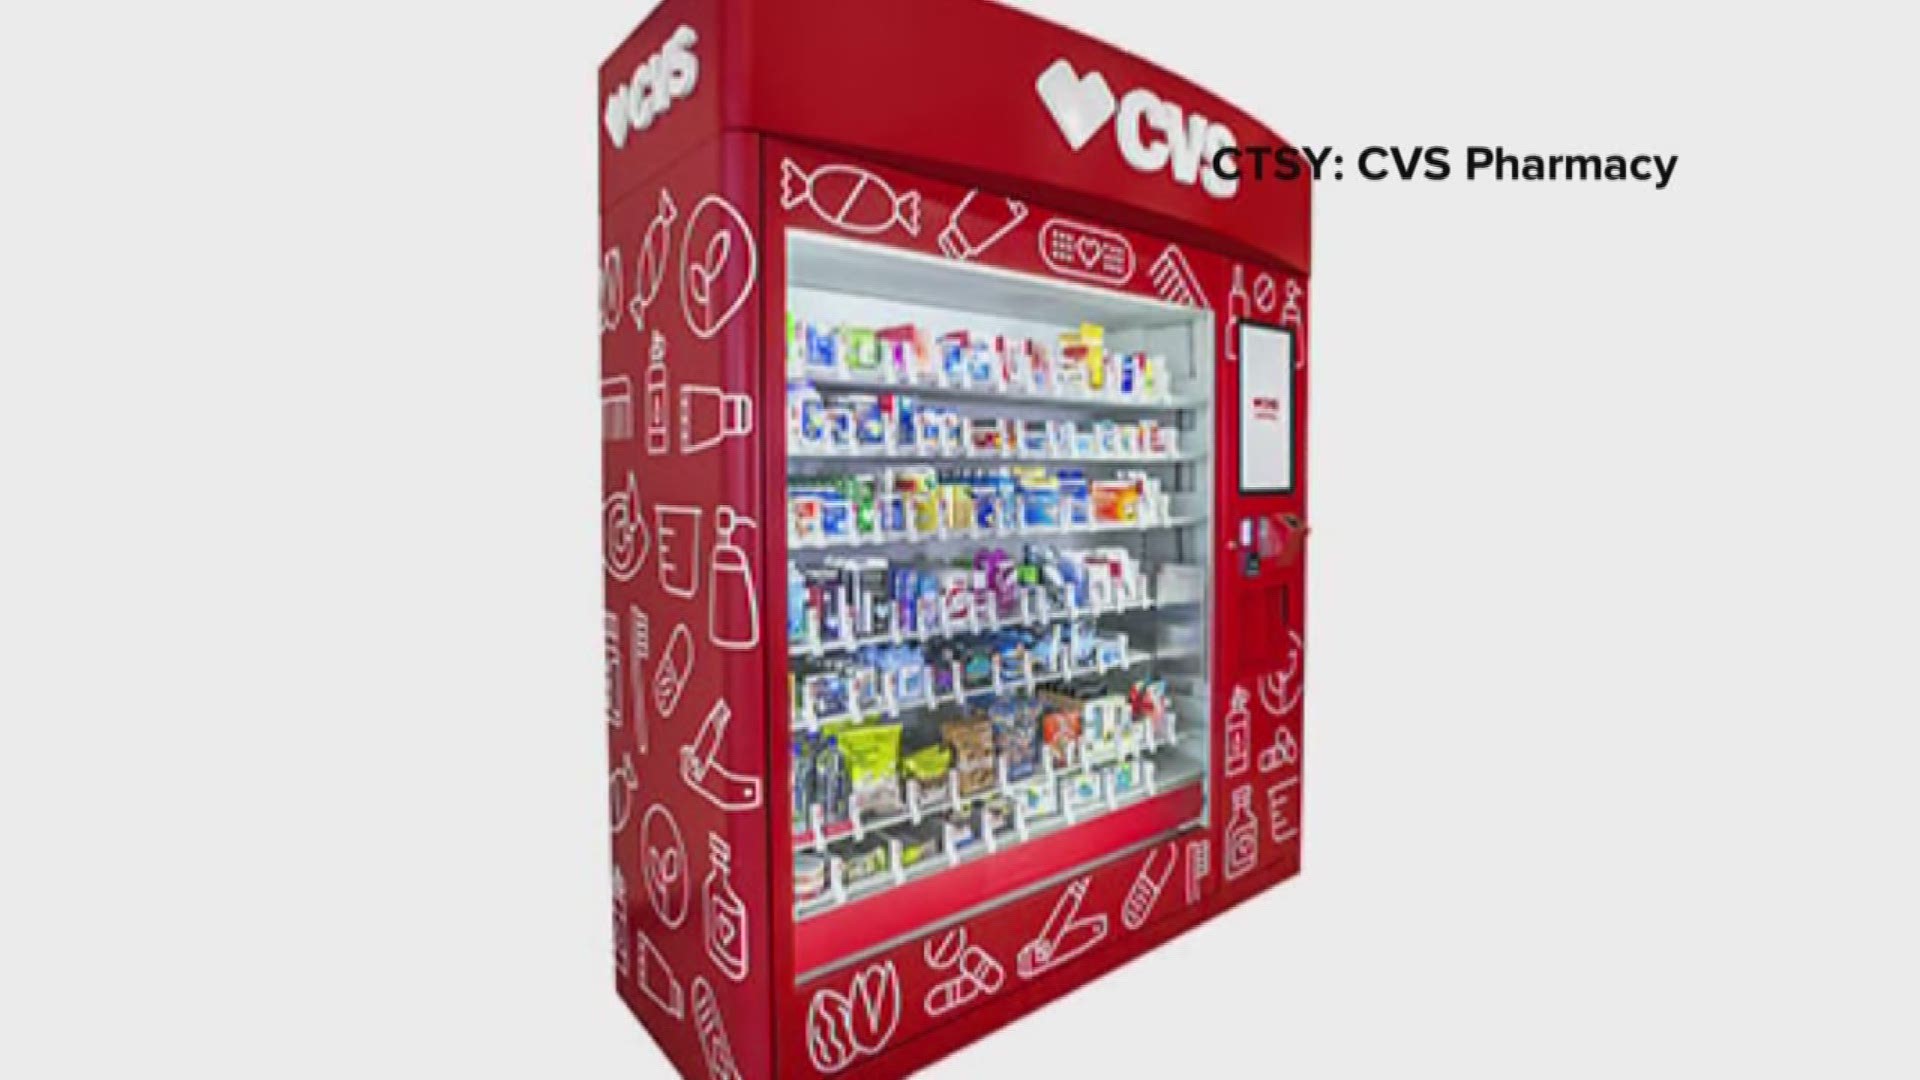 Over the counter drugs available in vending machines.